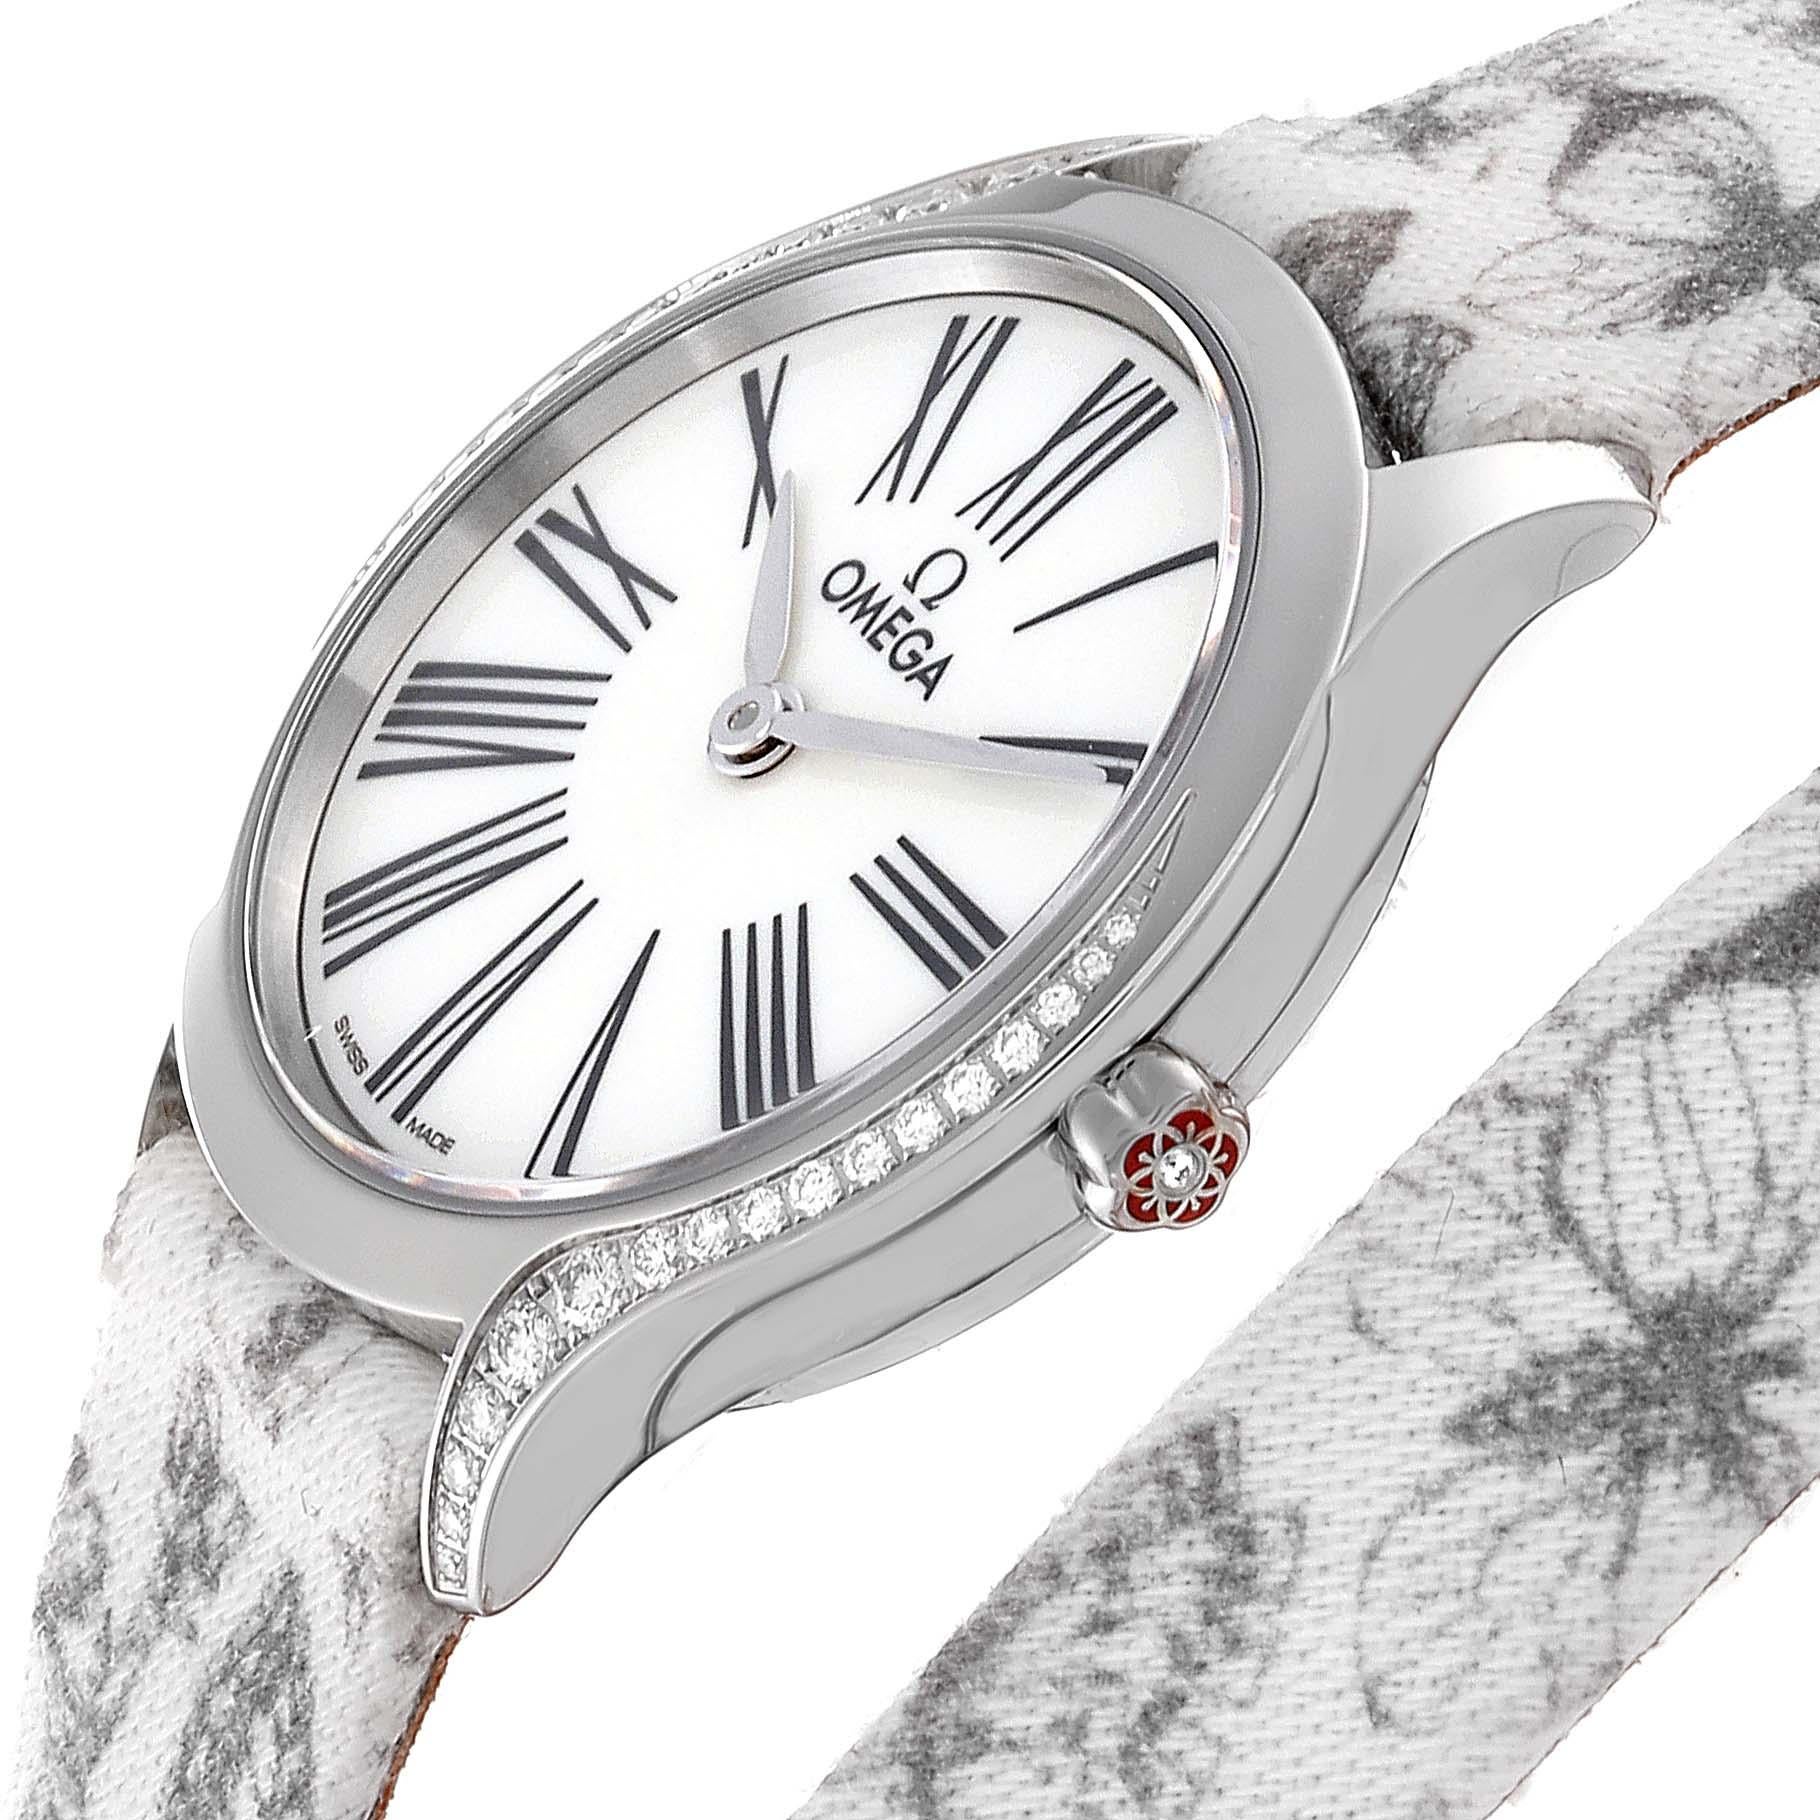 Omega DeVille Mini Tresor Steel Diamond Ladies Watch 428.17.26.60.04.002 Box Card. Quartz movement. Stainless steel round case 26.0 mm in diameter. Red ceramic flower on the crown with an original Omega factory diamond. Original Omega factory